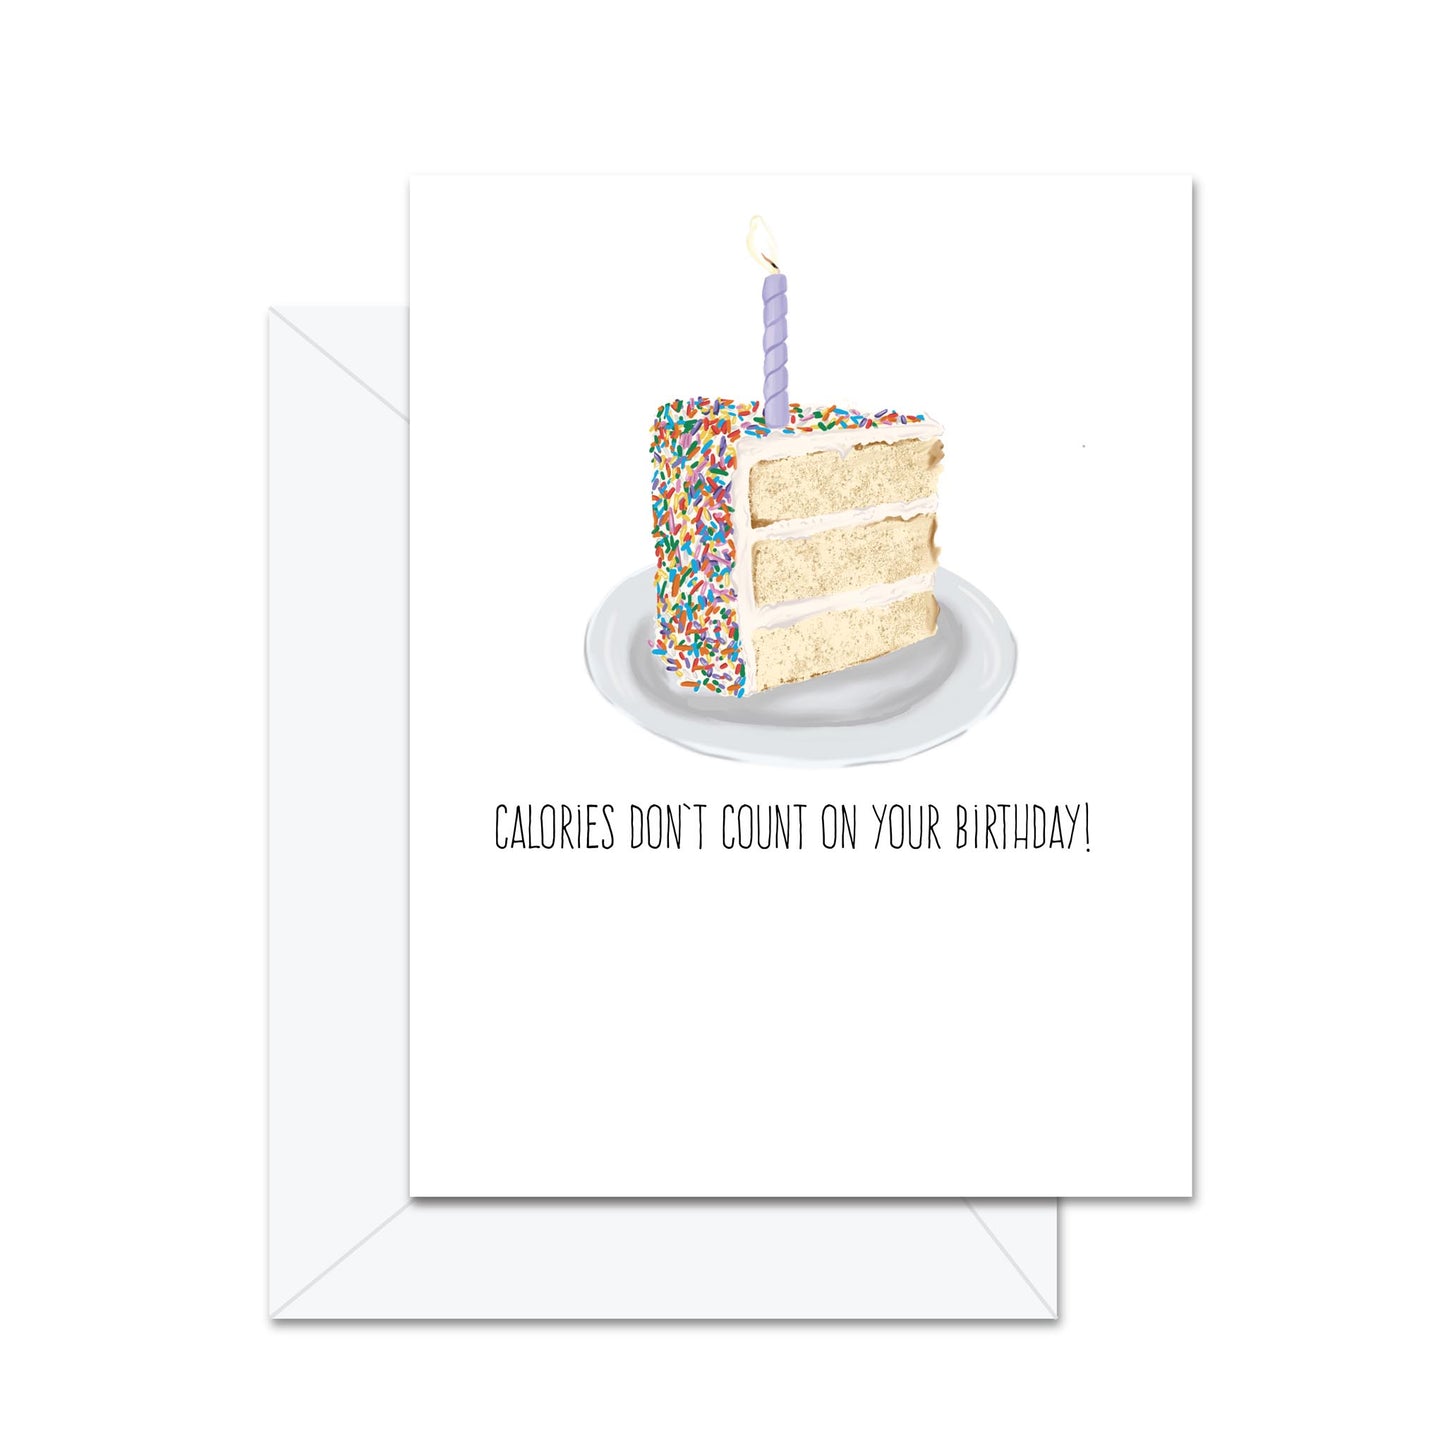 Calories Don't Count On Your Birthday! - Greeting Card